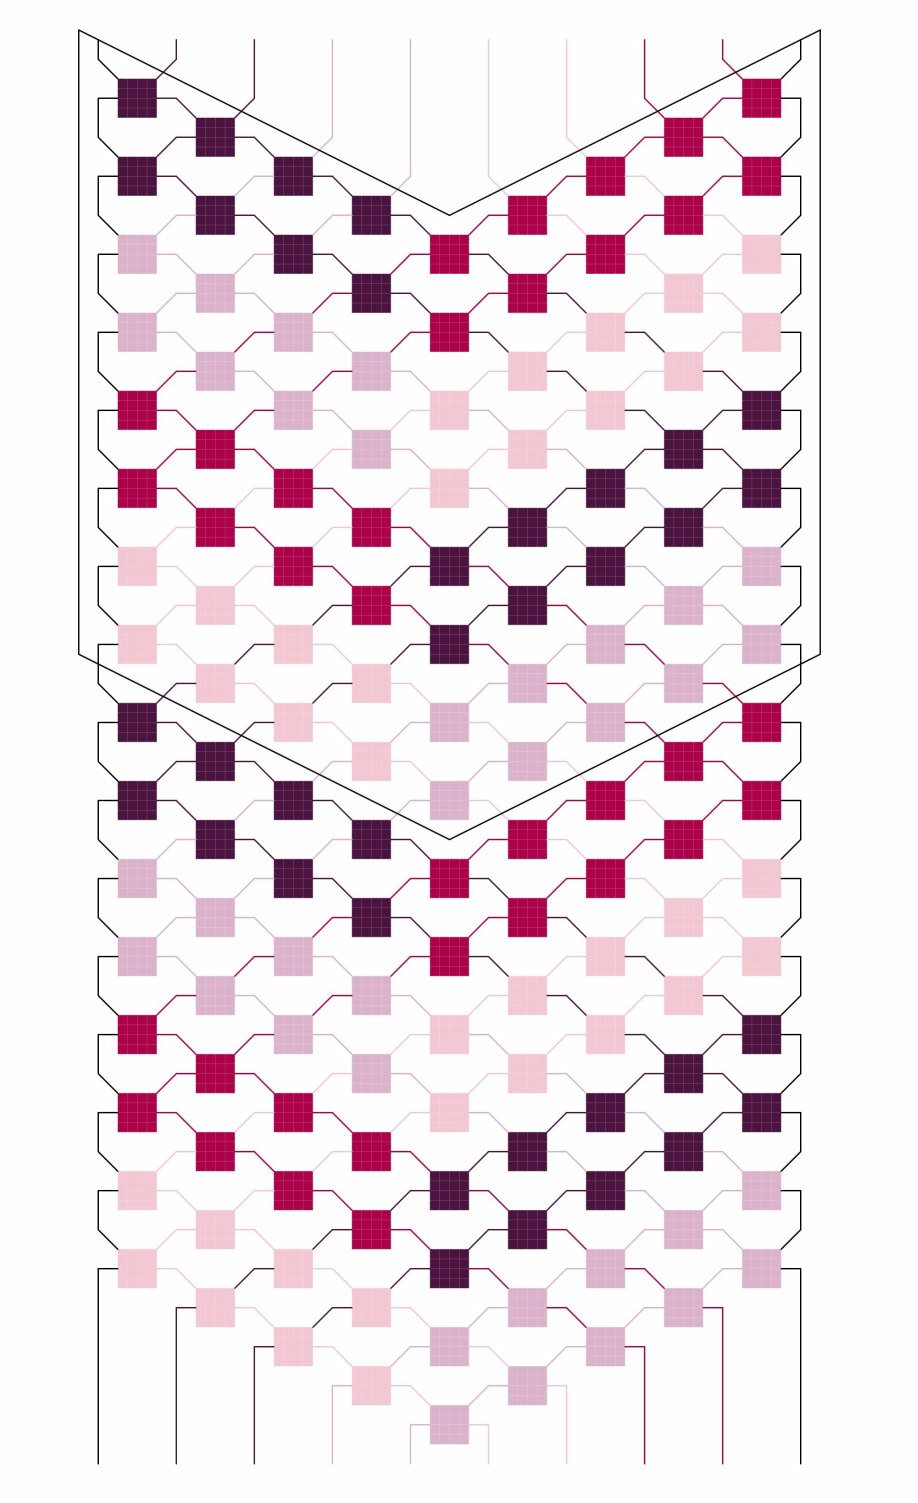 4-Colored stripes pattern